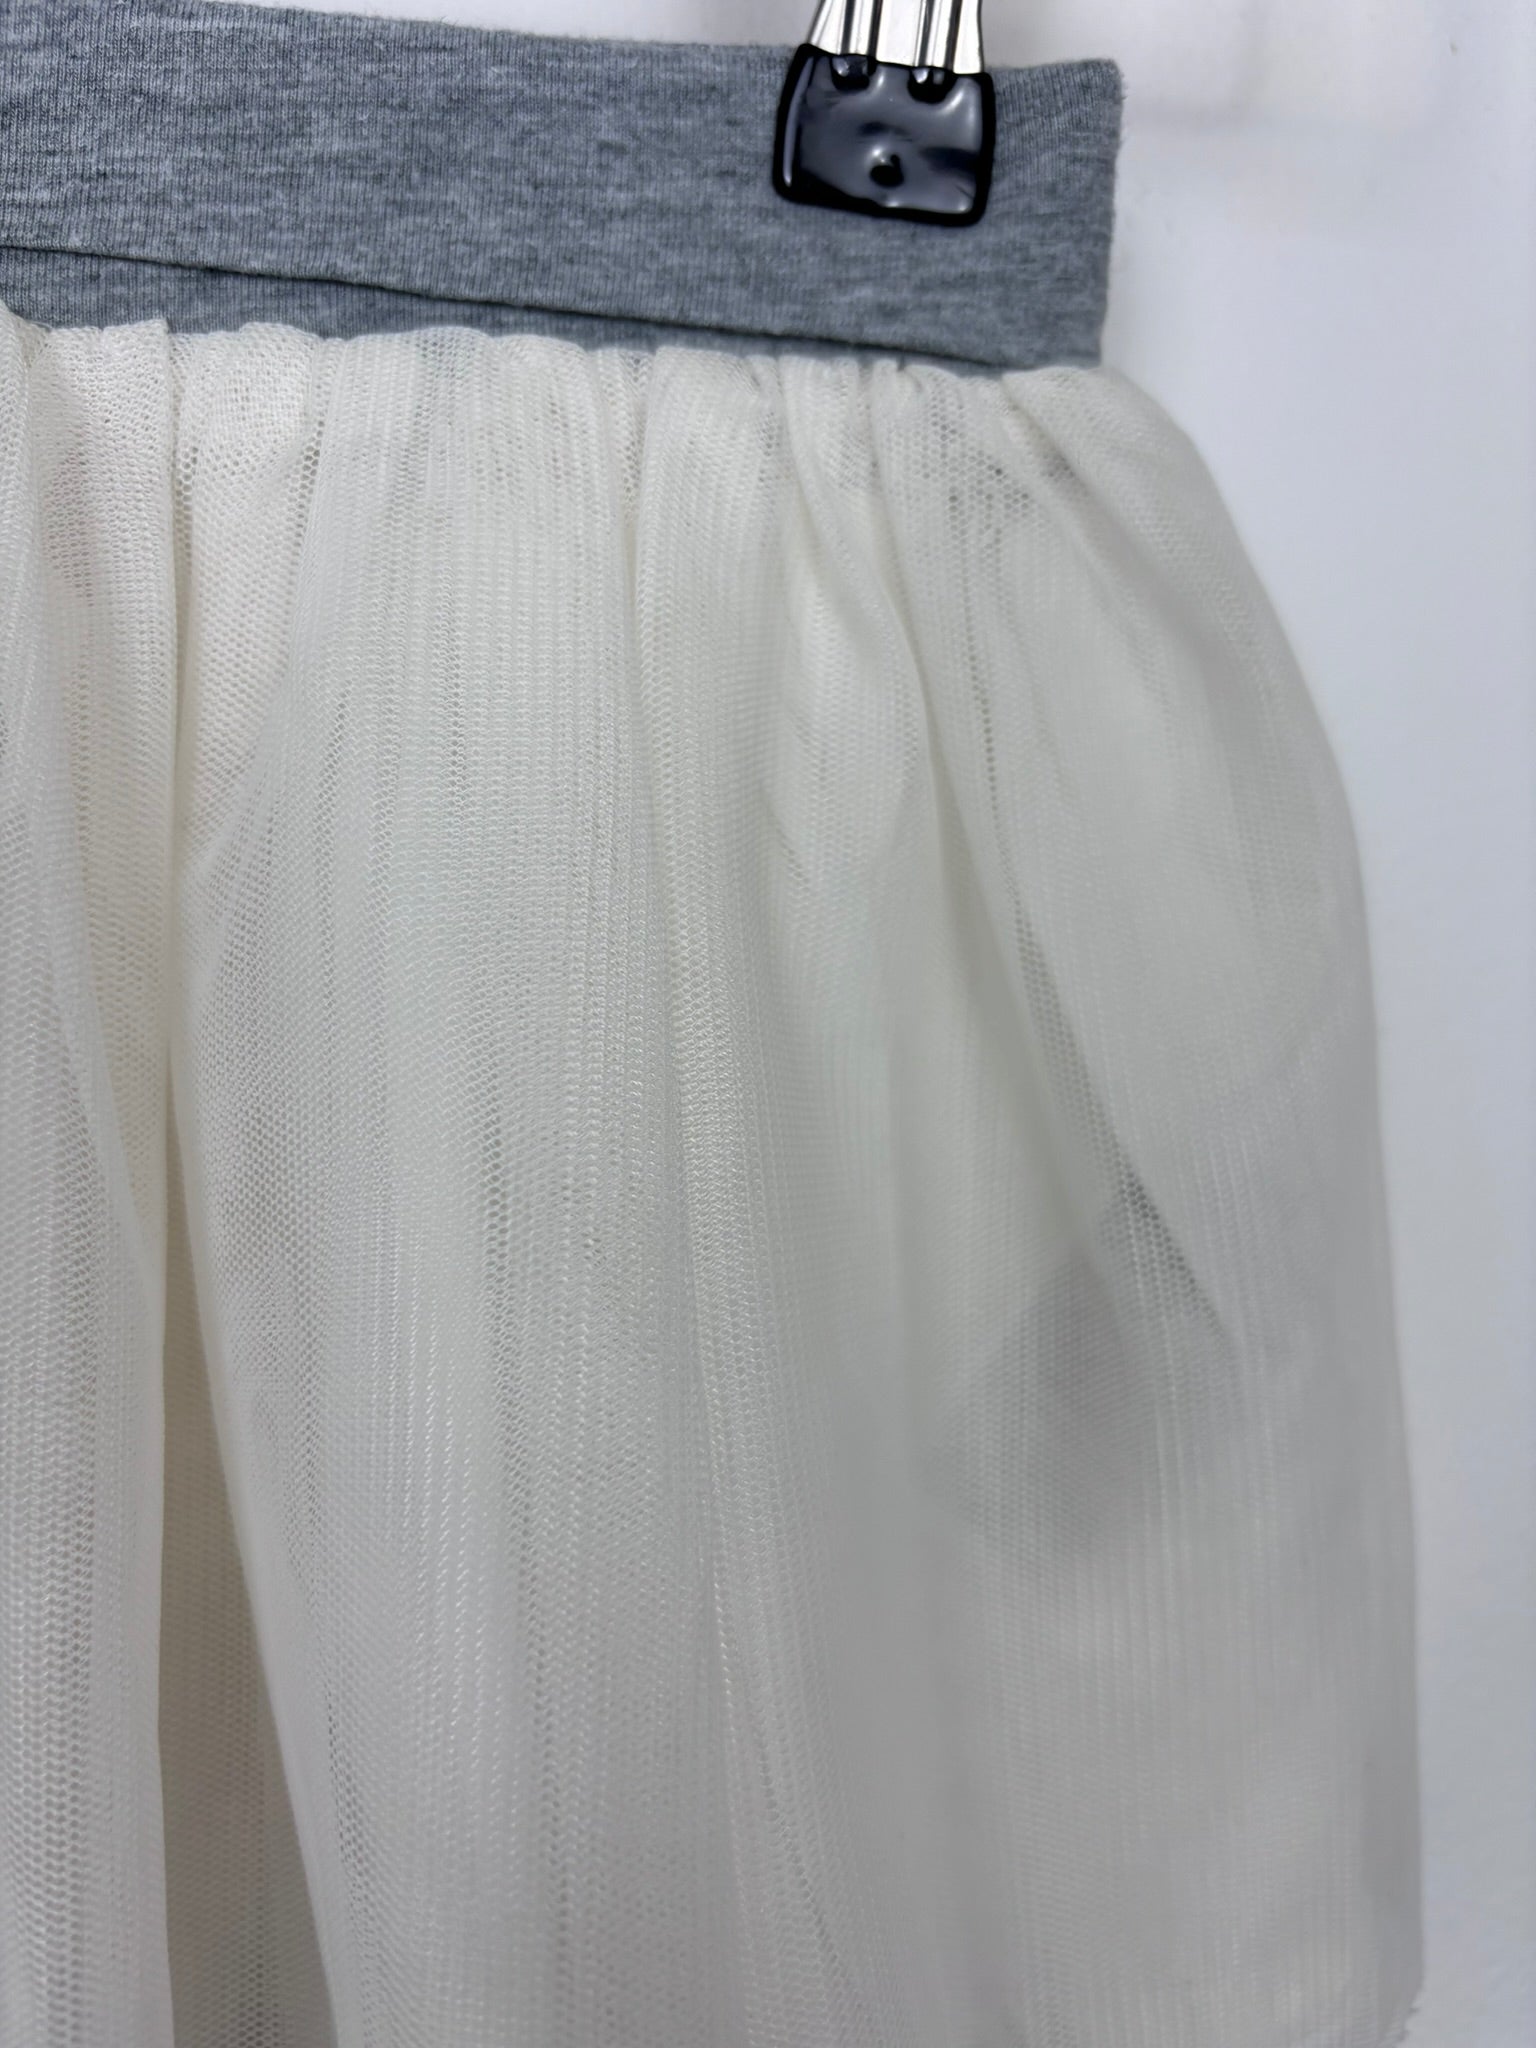 Baby Gap 18-24 Months-Skirts-Second Snuggle Preloved